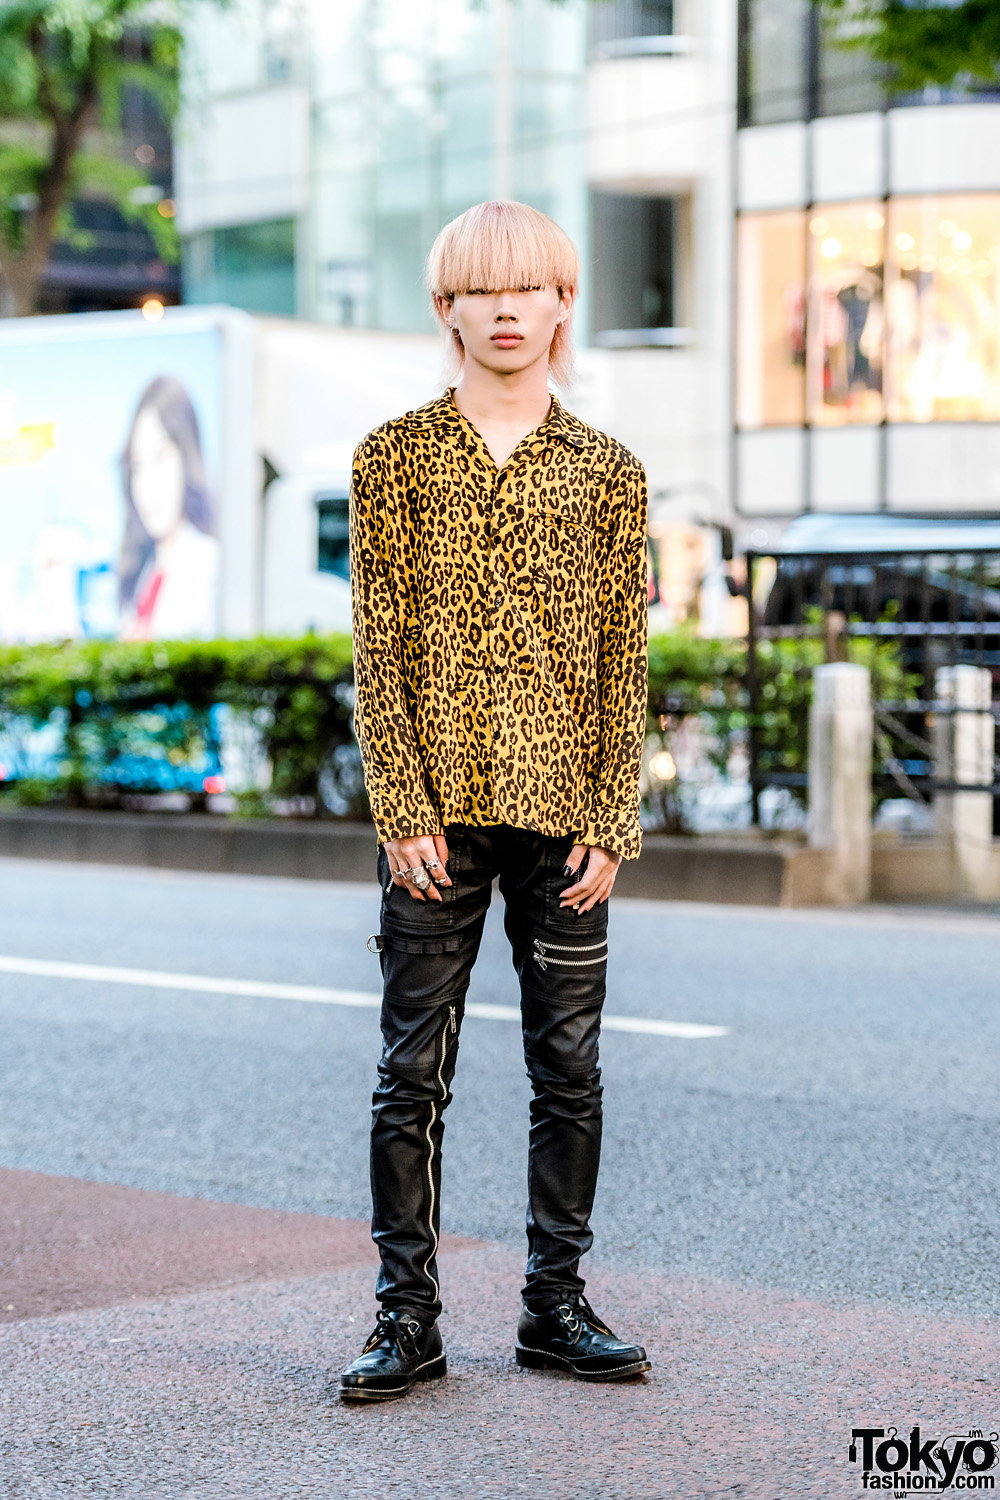 Hysteric Glamour Leopard Print Shirt, 99%IS- Leather Pants & George Cox D Ring Creepers in Harajuku